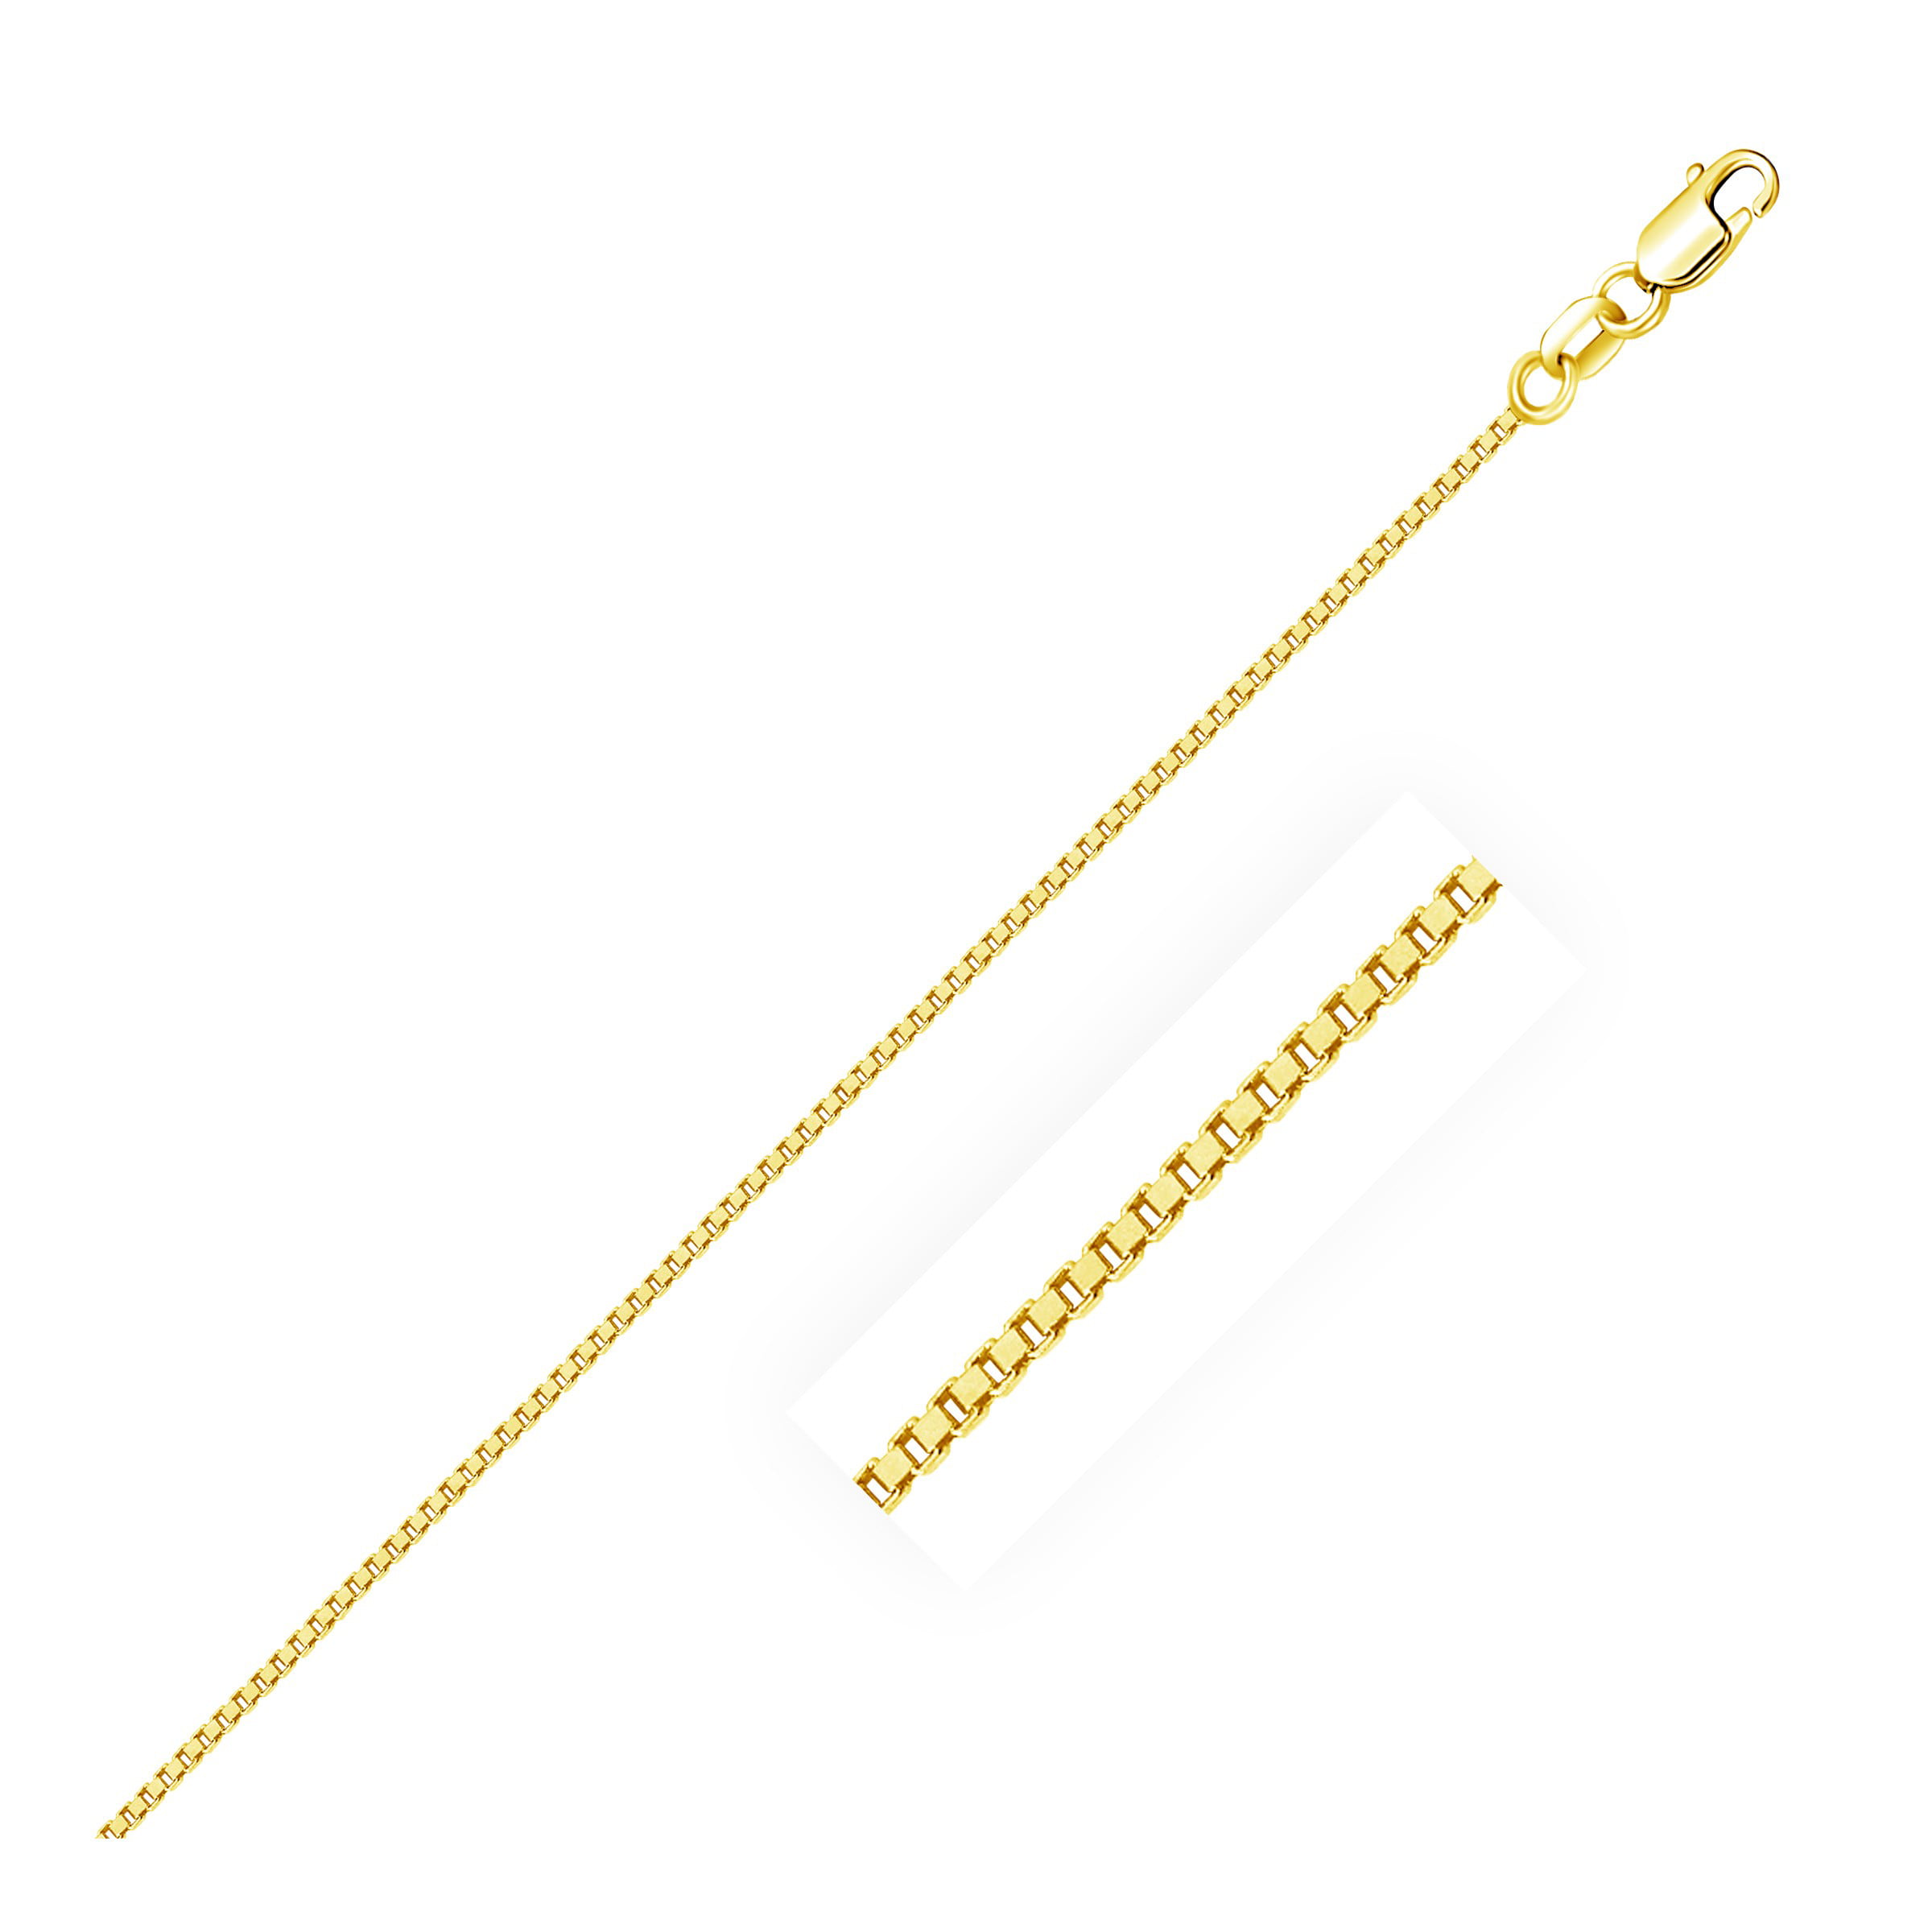 TGDJ 14k Yellow OR White Gold Solid 0.7mm Round Snake Chain Necklace with Lobster Claw Clasp